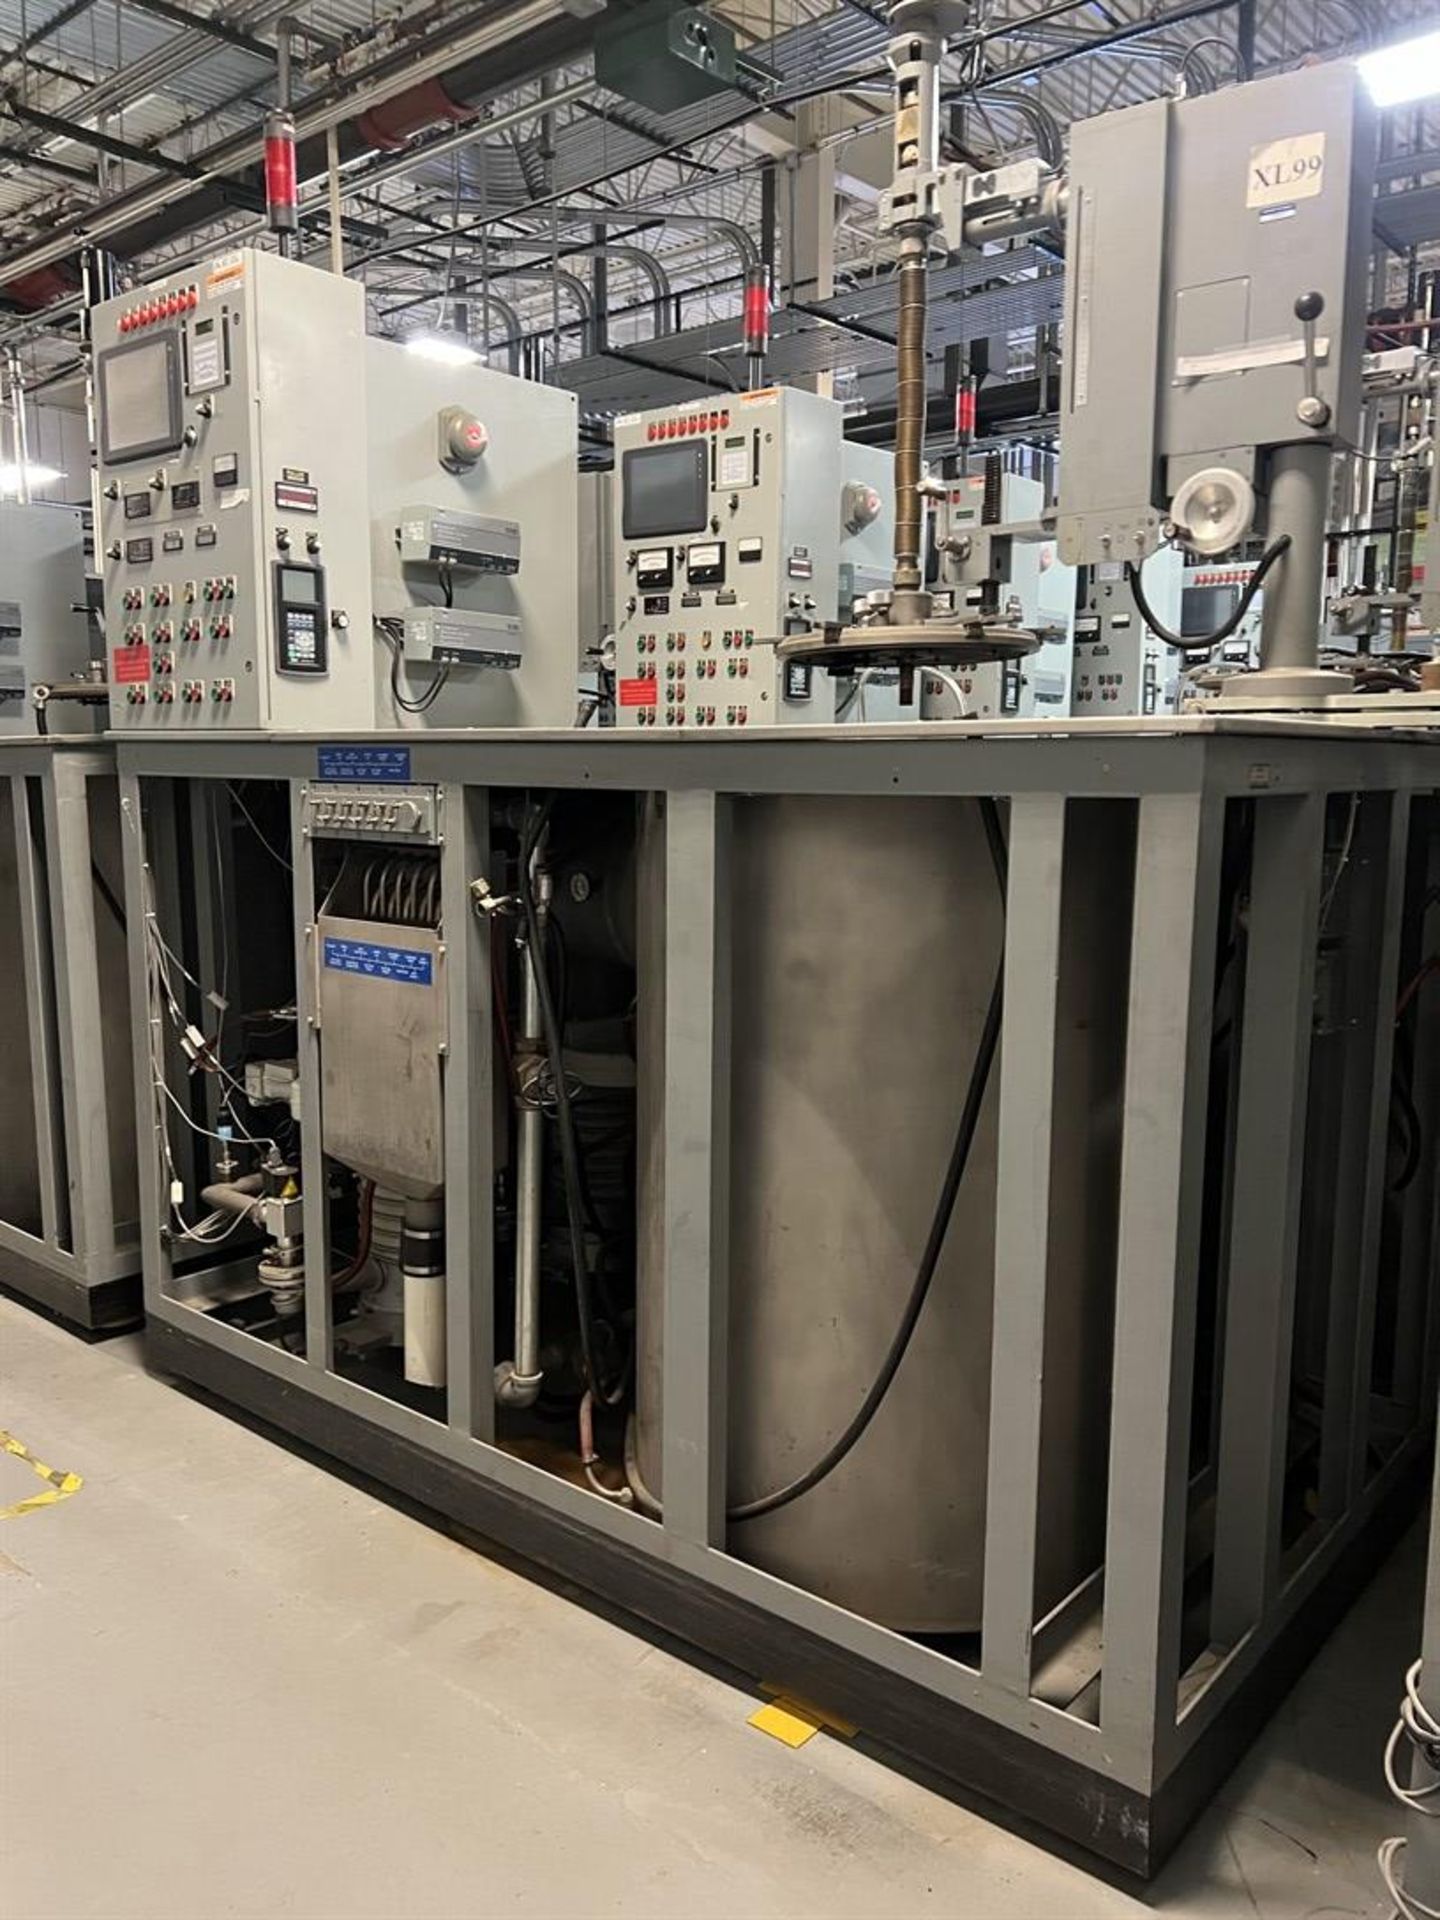 83 KG KYROPOULOS Growth Furnace w/ WARNER 135 KW SCR Controlled DC Power Supply, 16-Day Process